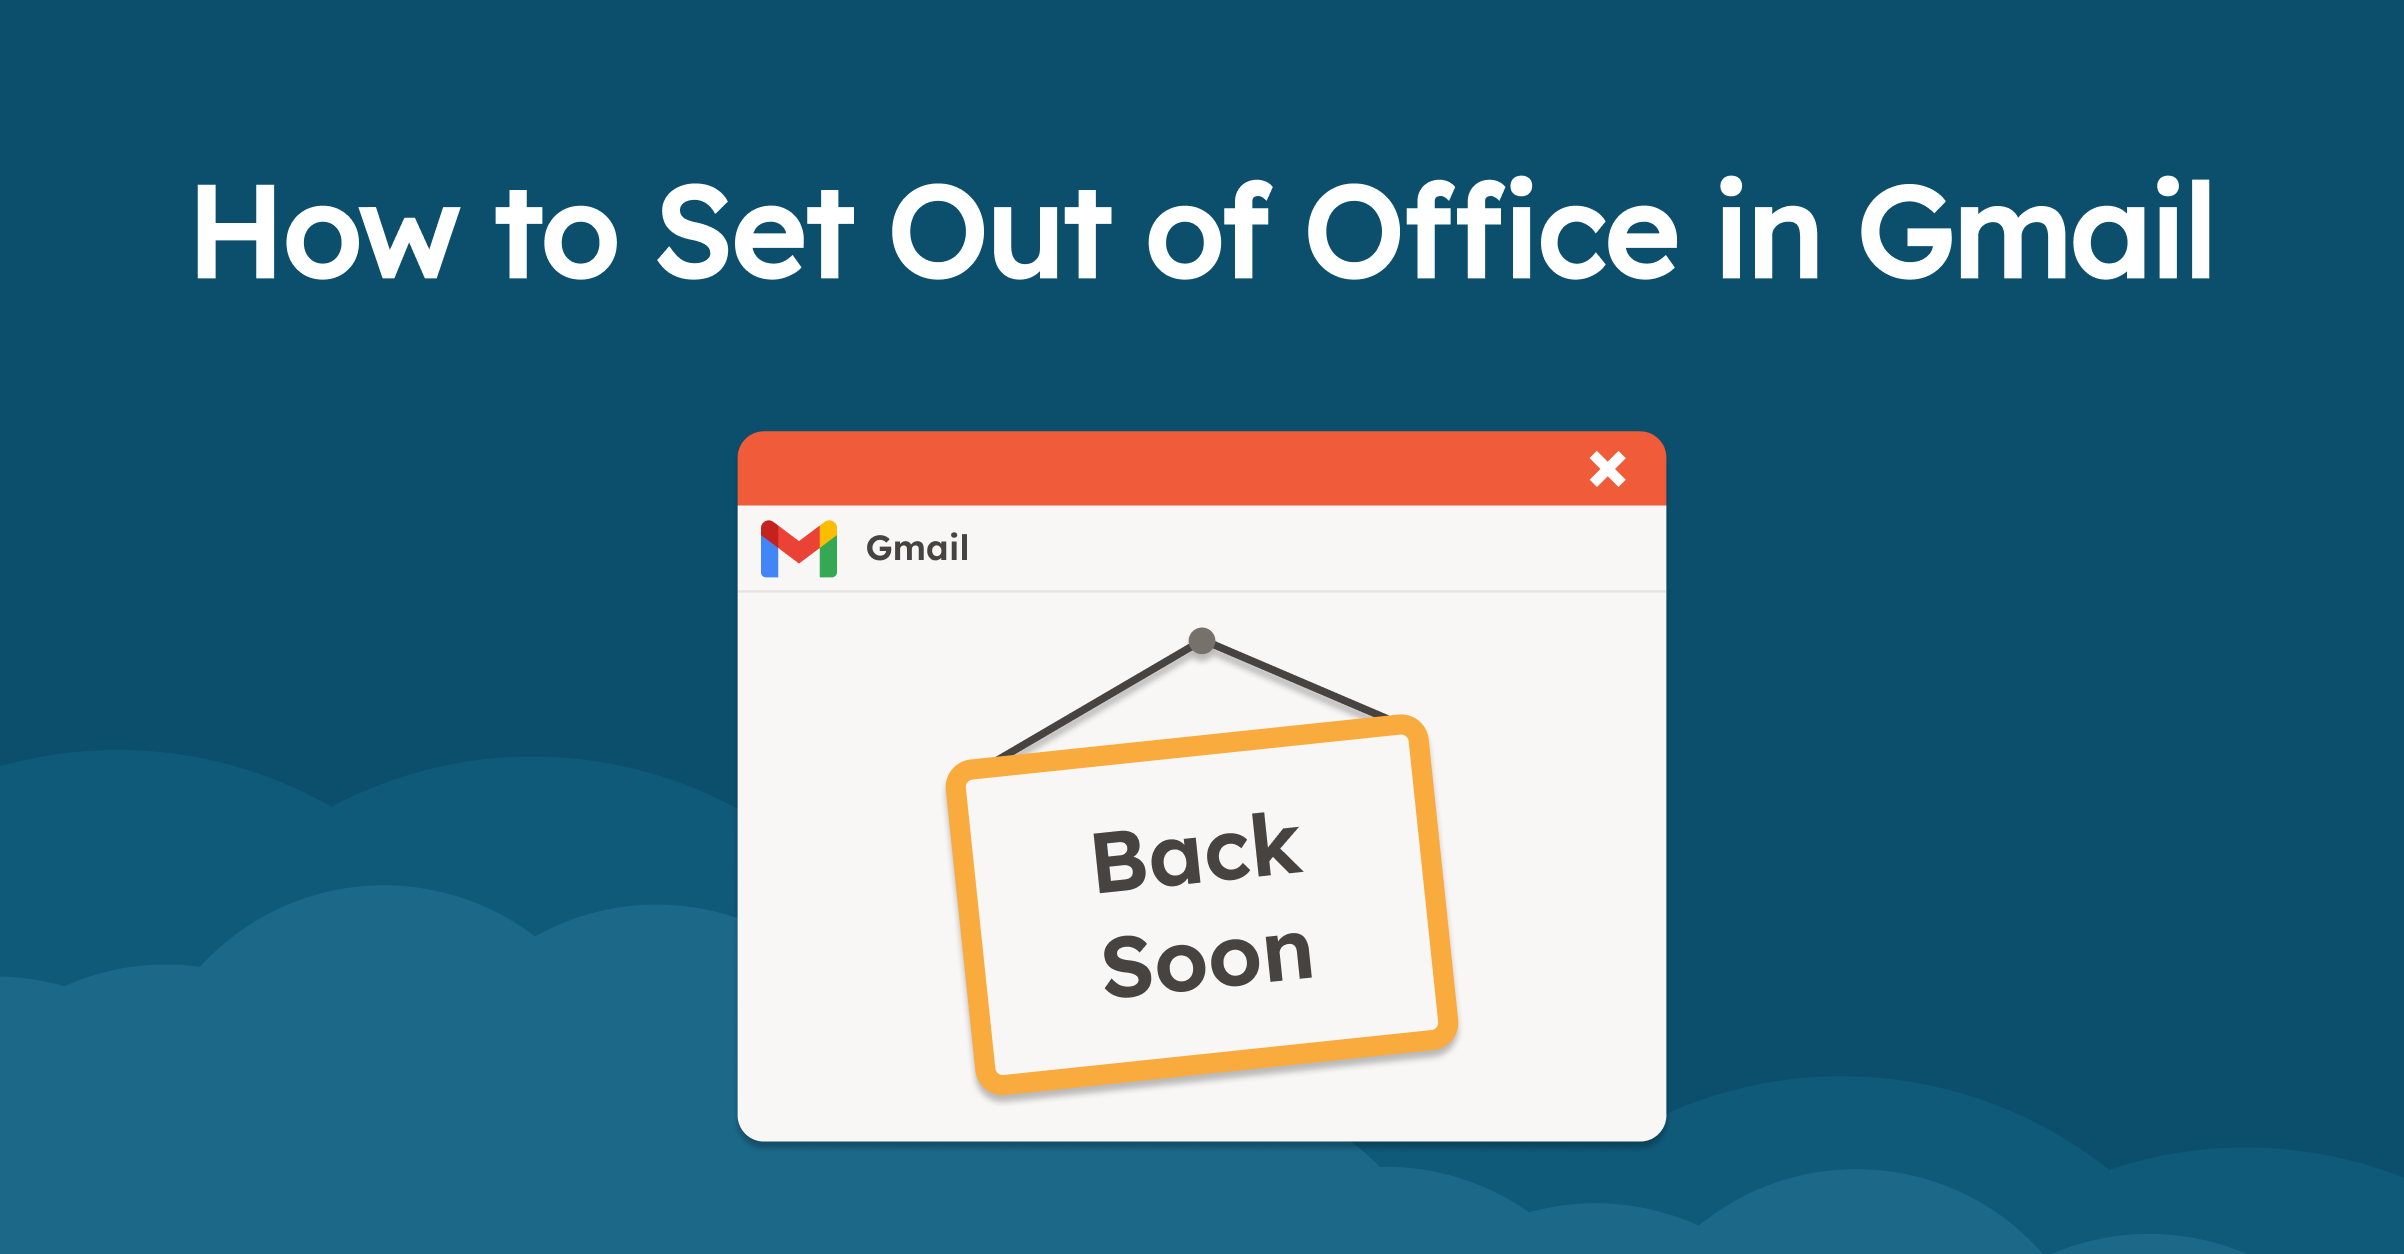 How to Set Out of Office in Gmail